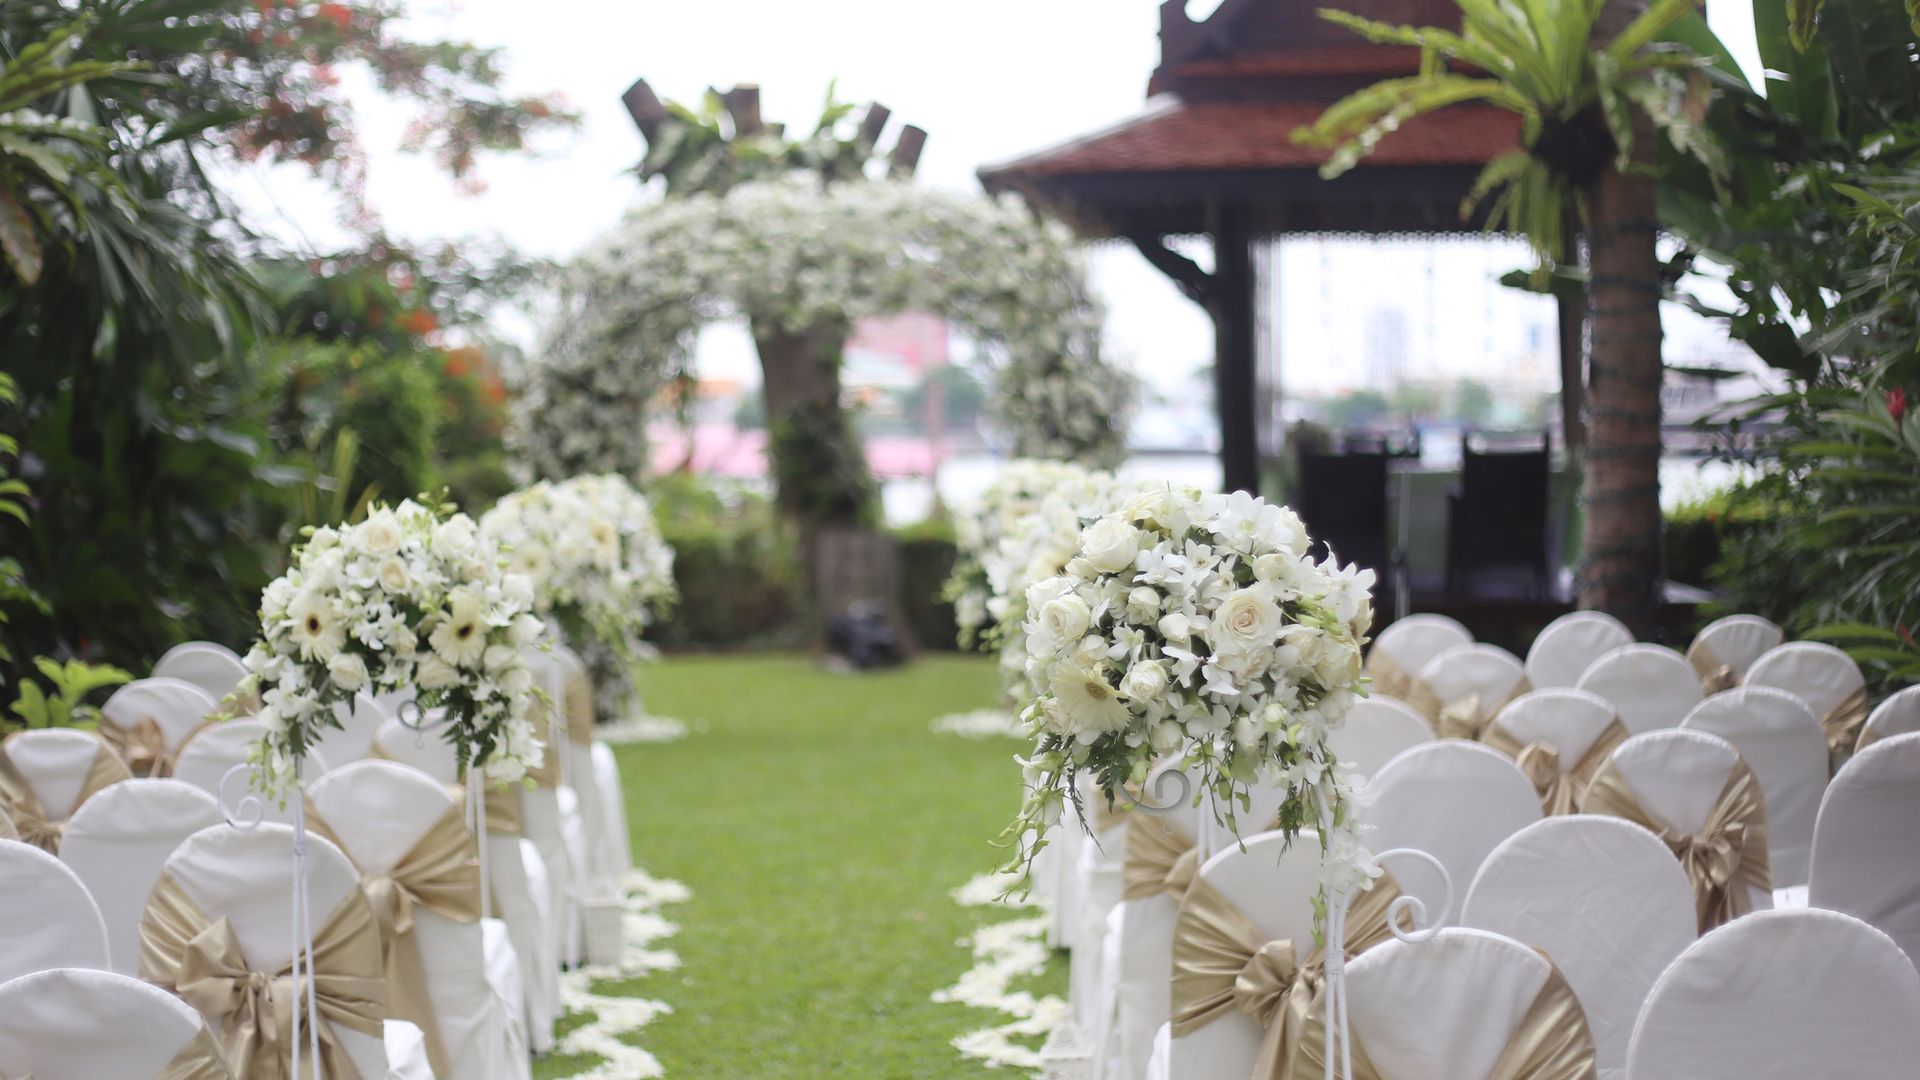 How much do wedding venues cost?